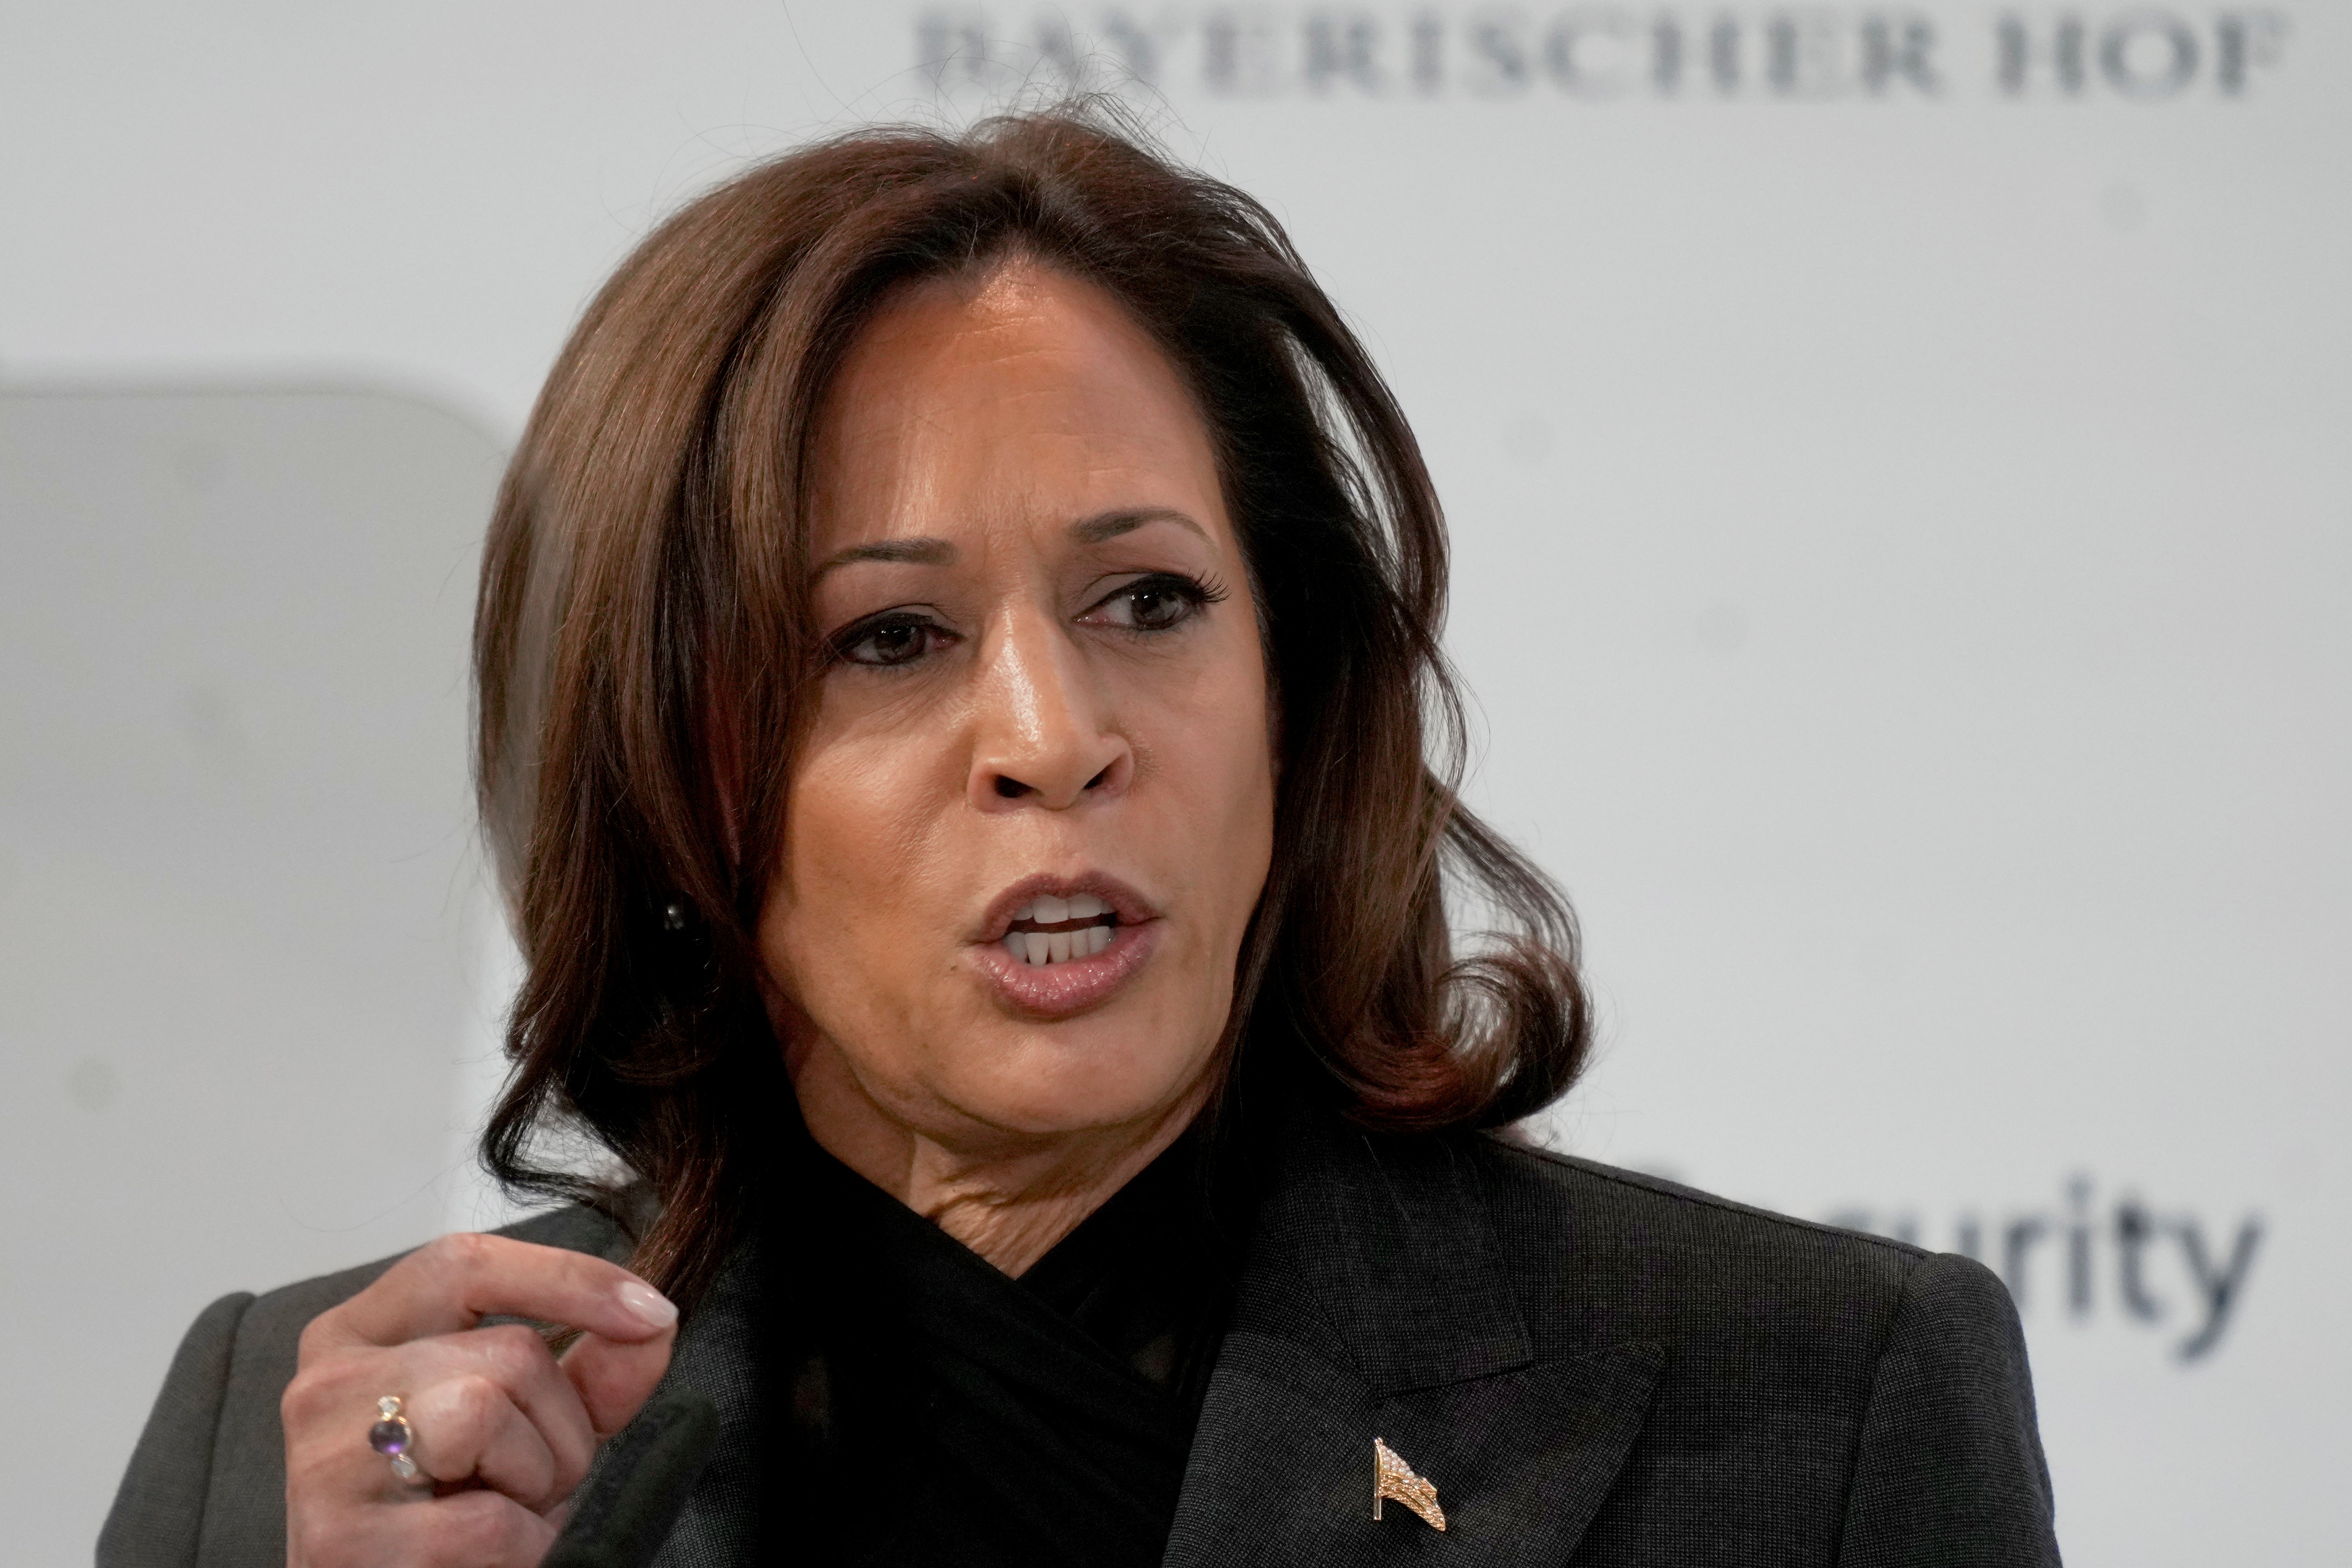 Vice President of the United States Kamala Harris speaks at the Munich Security Conference